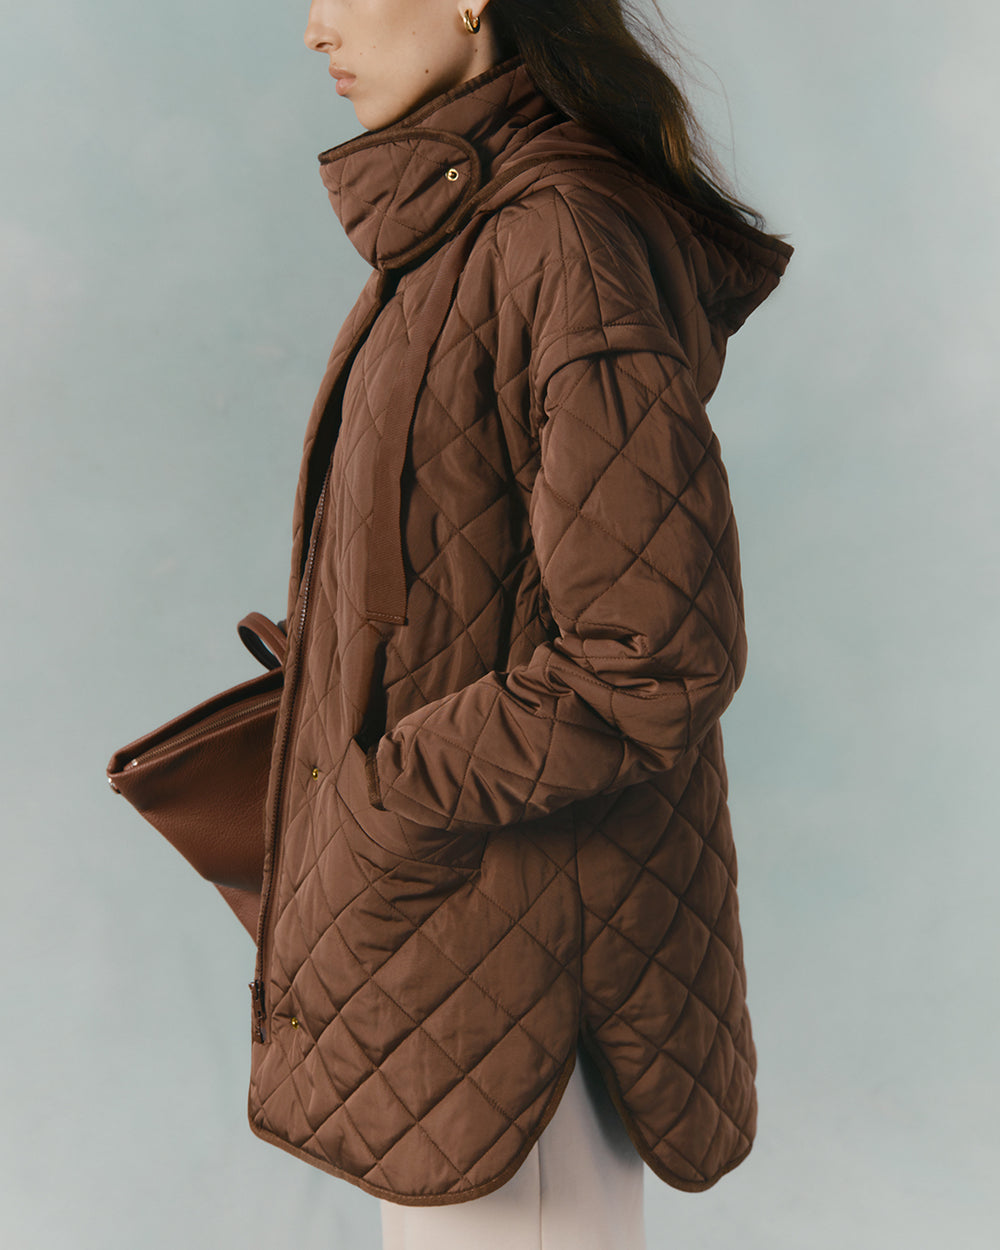 Side profile of a person wearing a quilted jacket and holding a clutch.